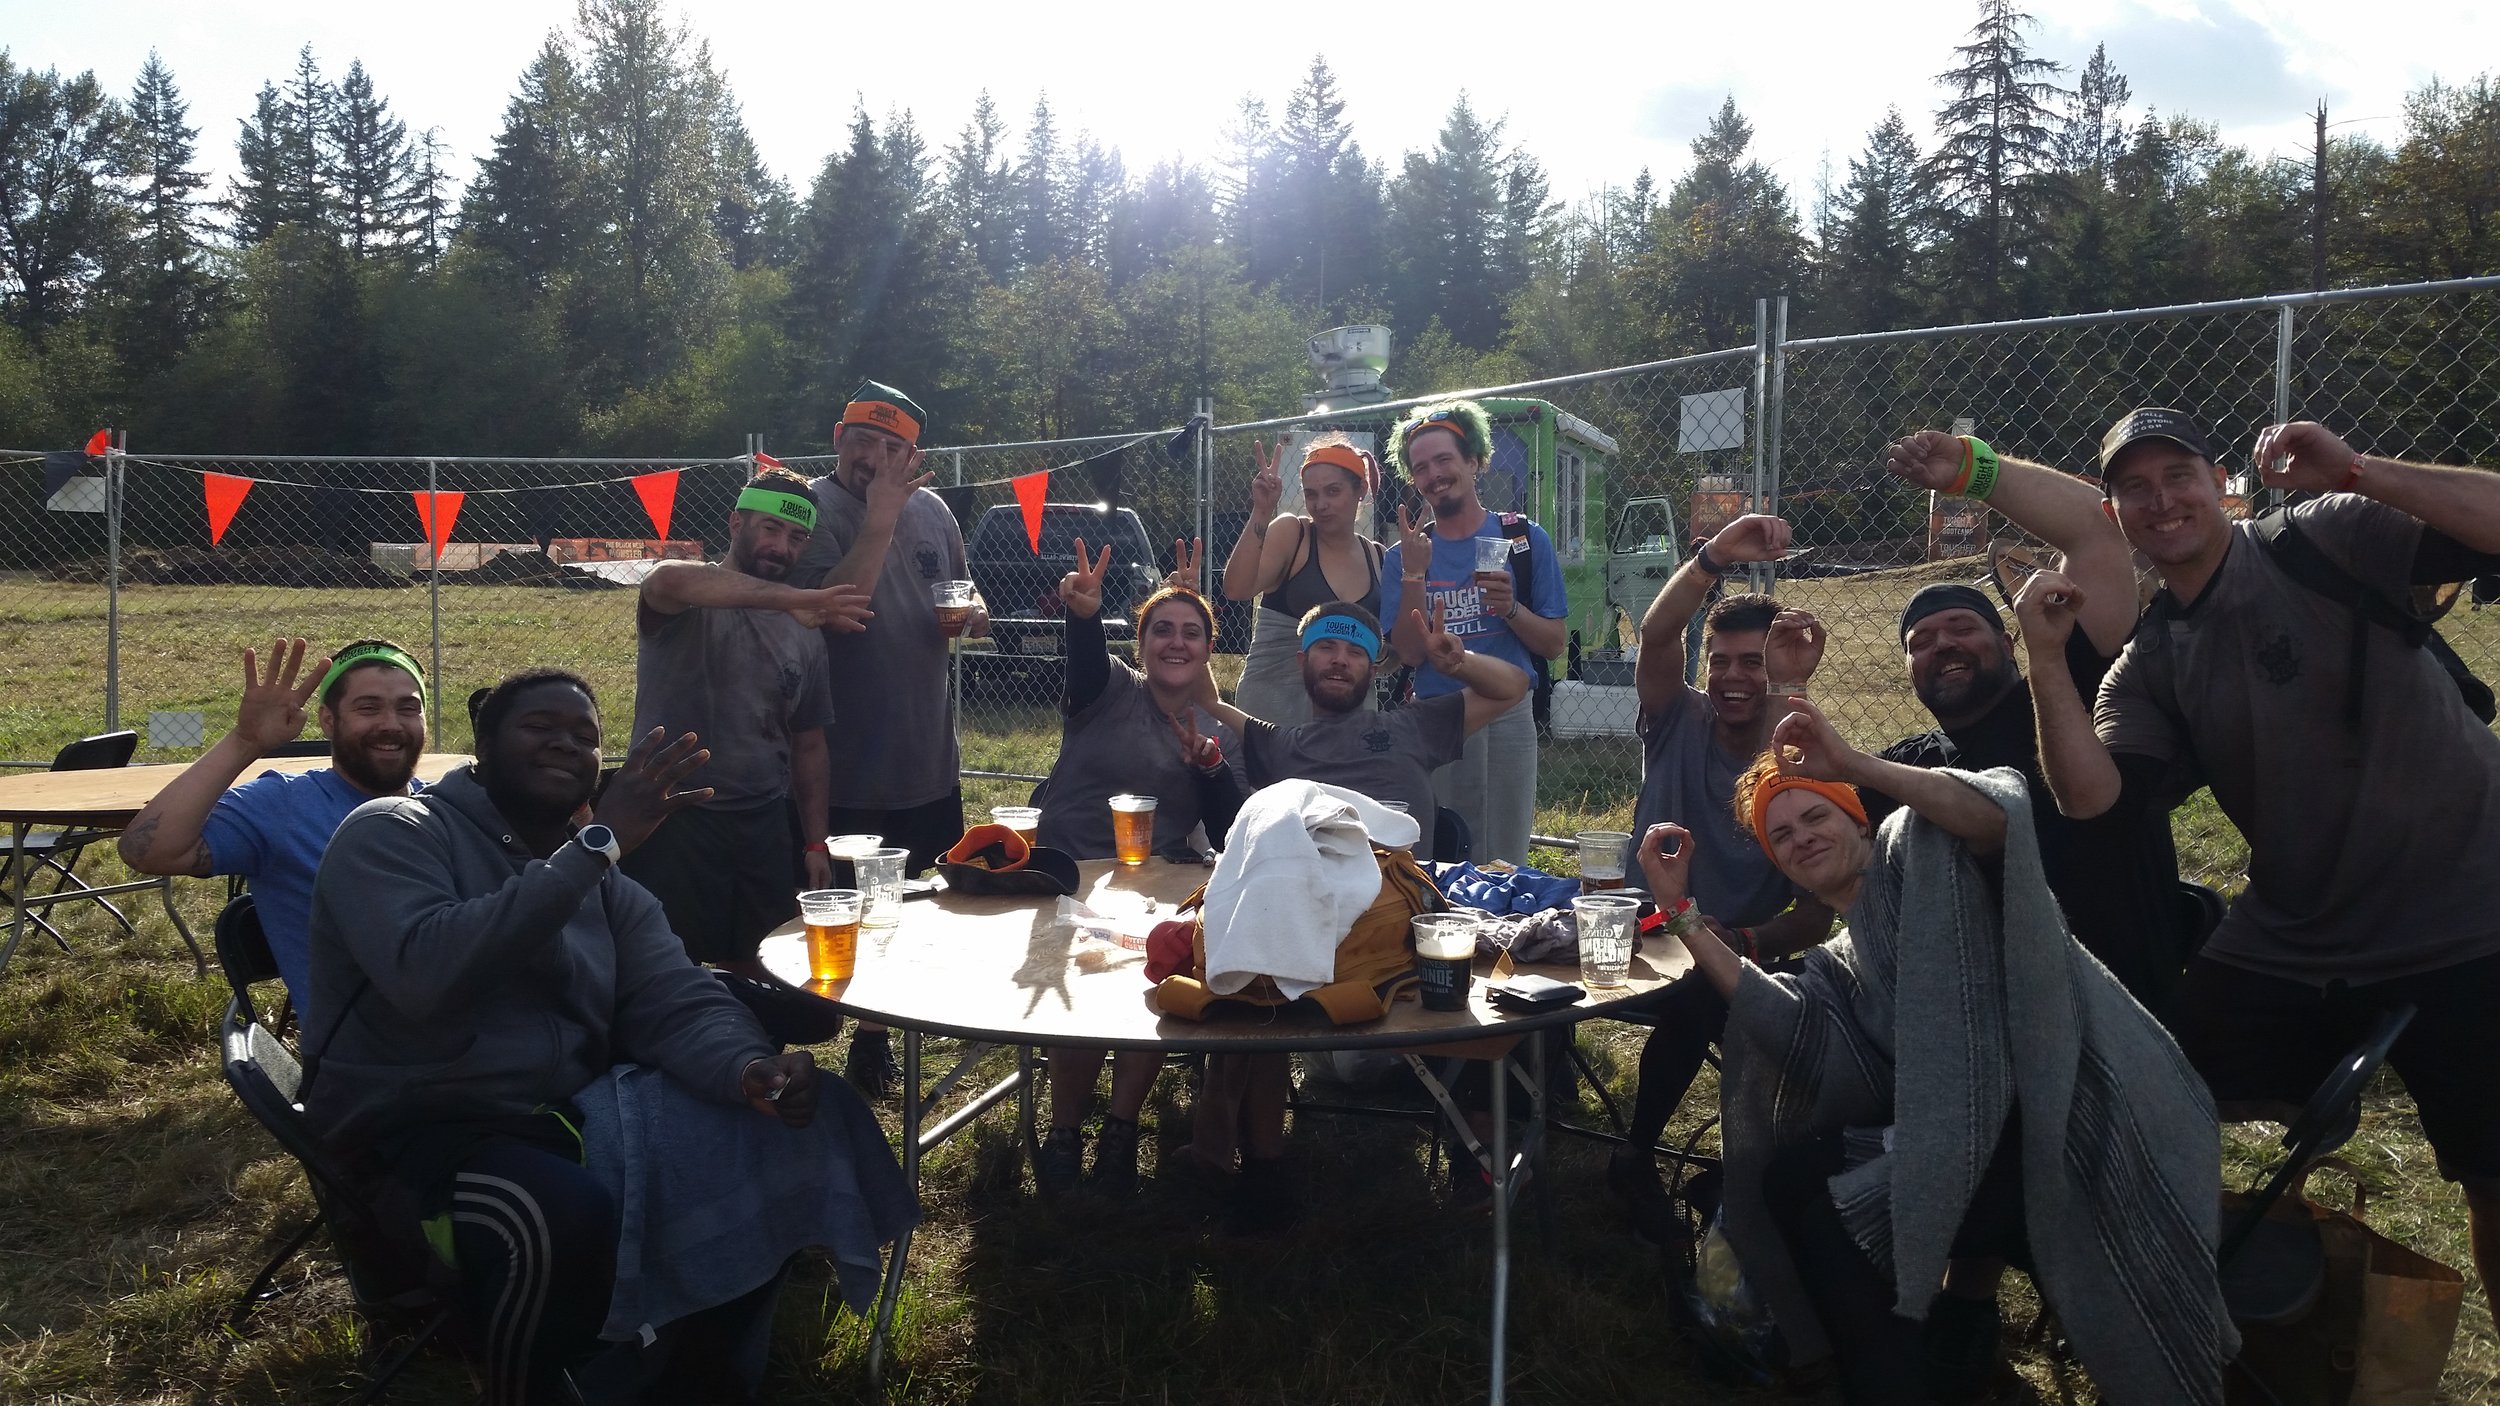 Team Destination HWY 420 after completing the 2018 Seattle Tough Mudder. Fueled by cannabis, we crushed this endurance obstacle course. We crawled through mud, swam through ice water, and even got shocked with electricity, but none of these obstacles were able to keep us away from the finish line.